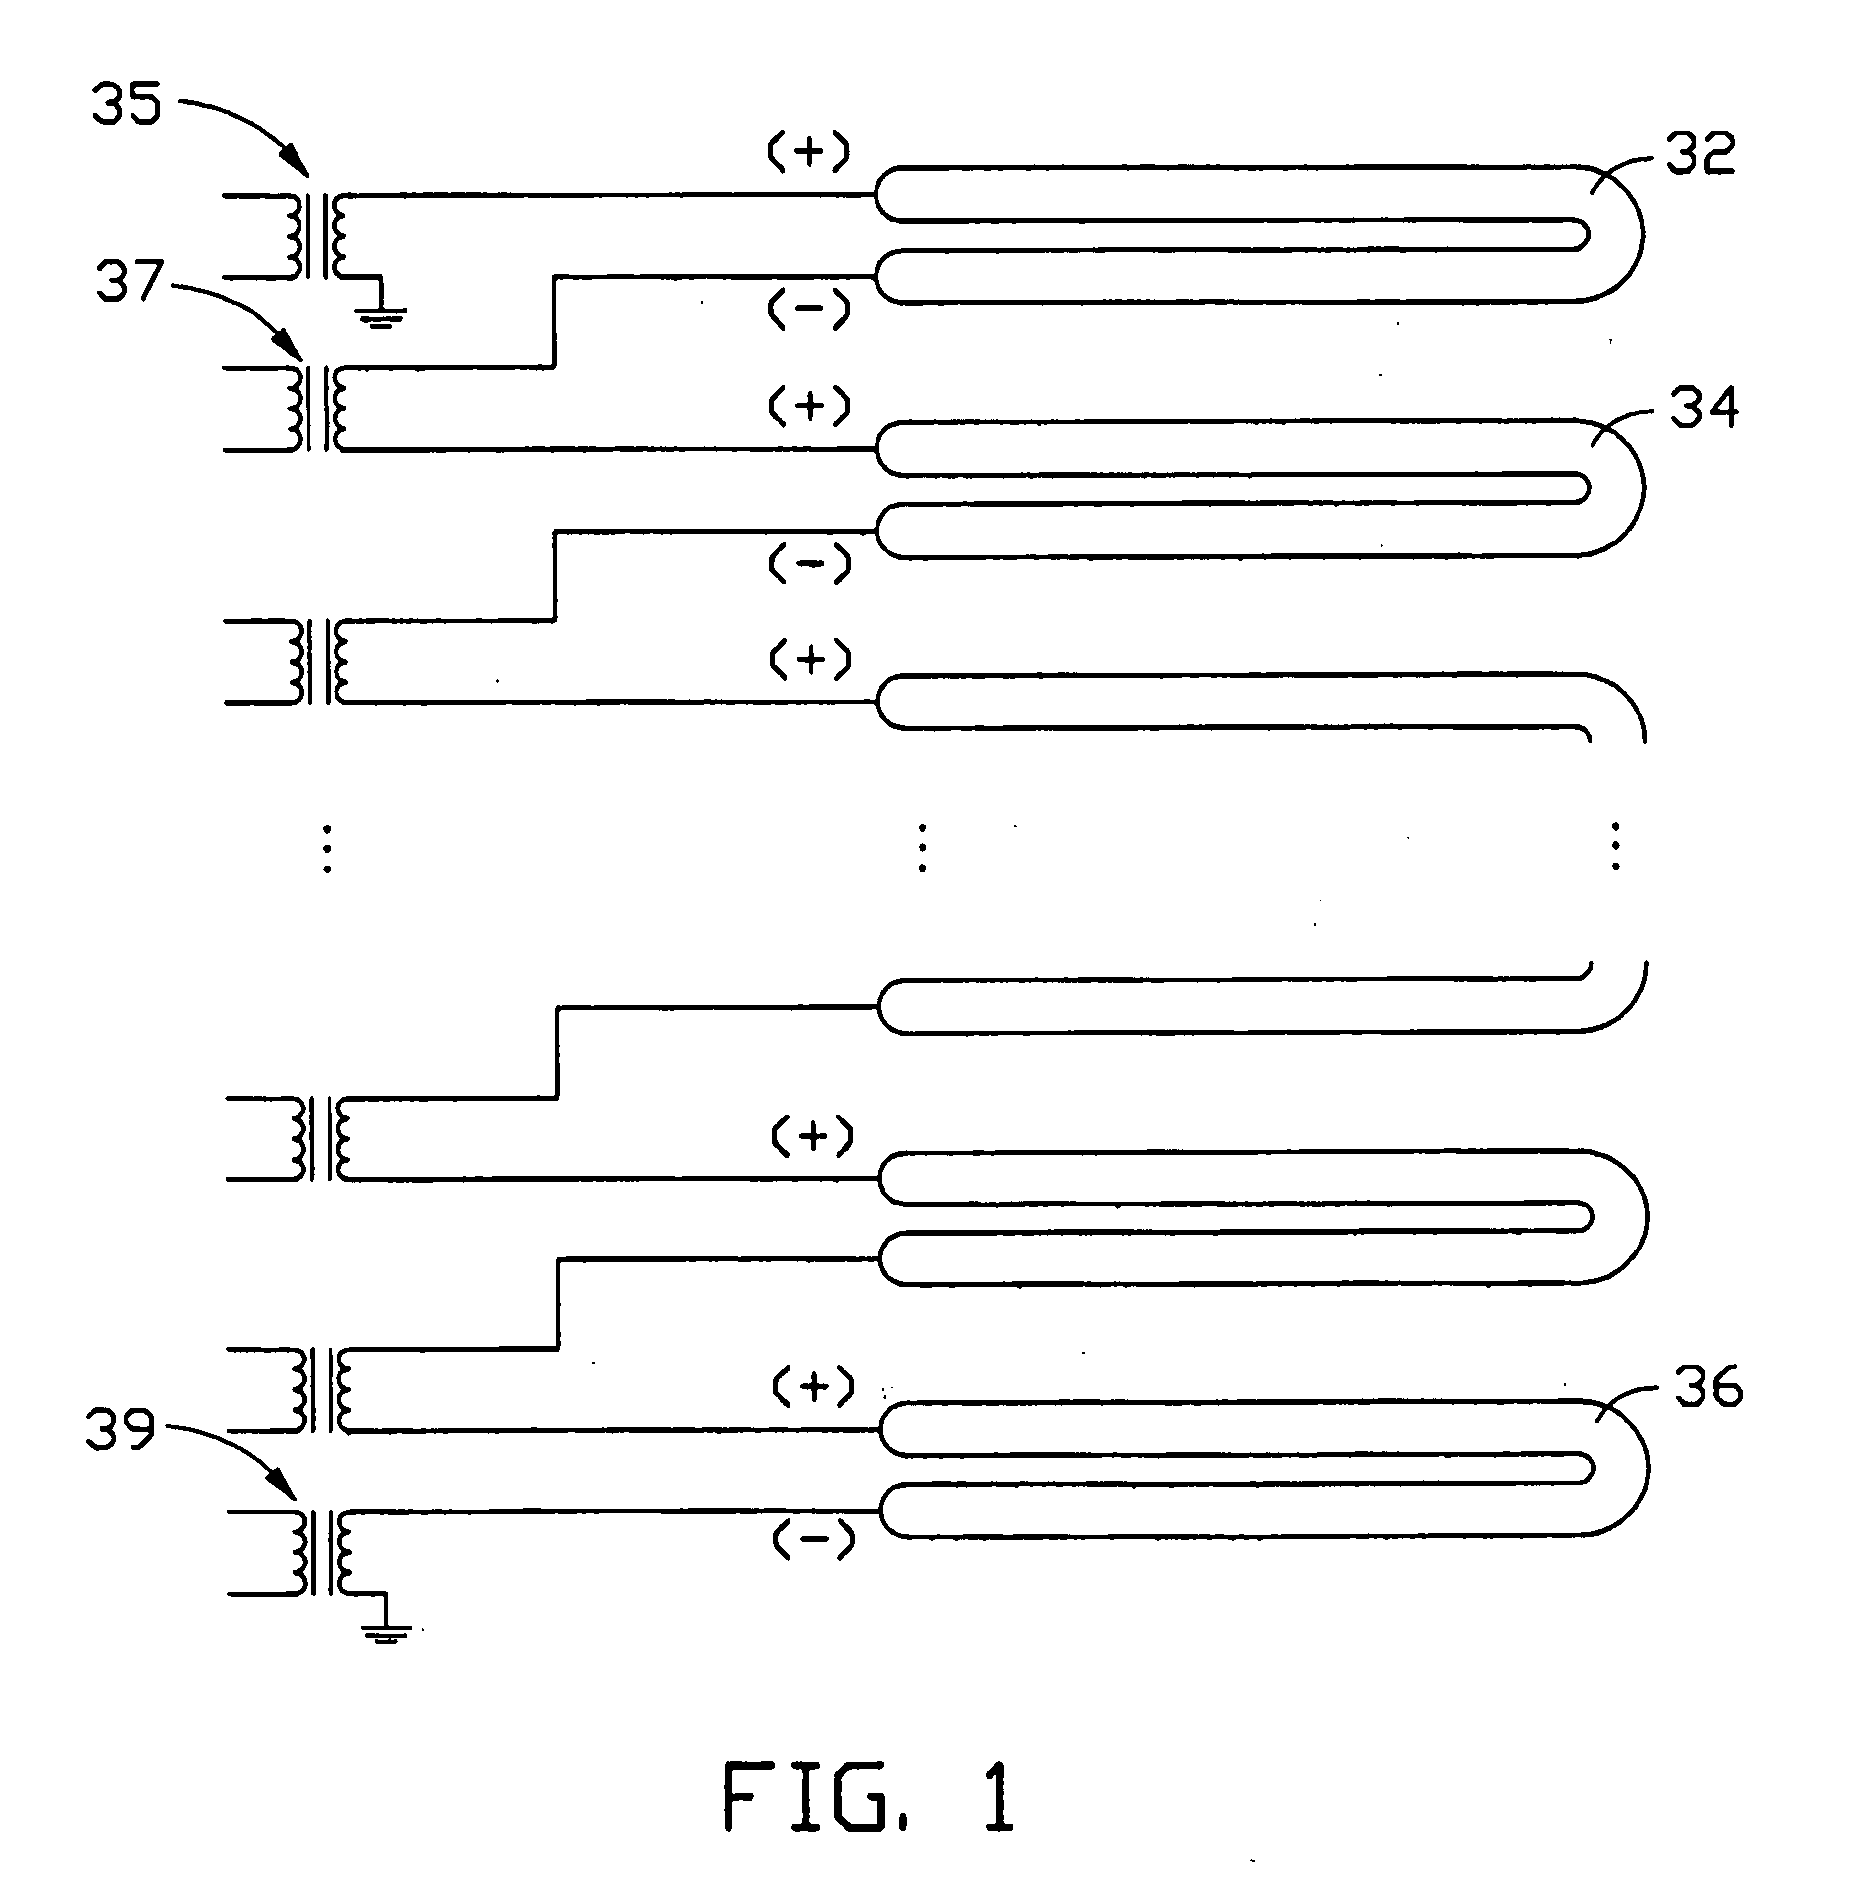 Lighting apparatus formed by serially-Driven lighting units